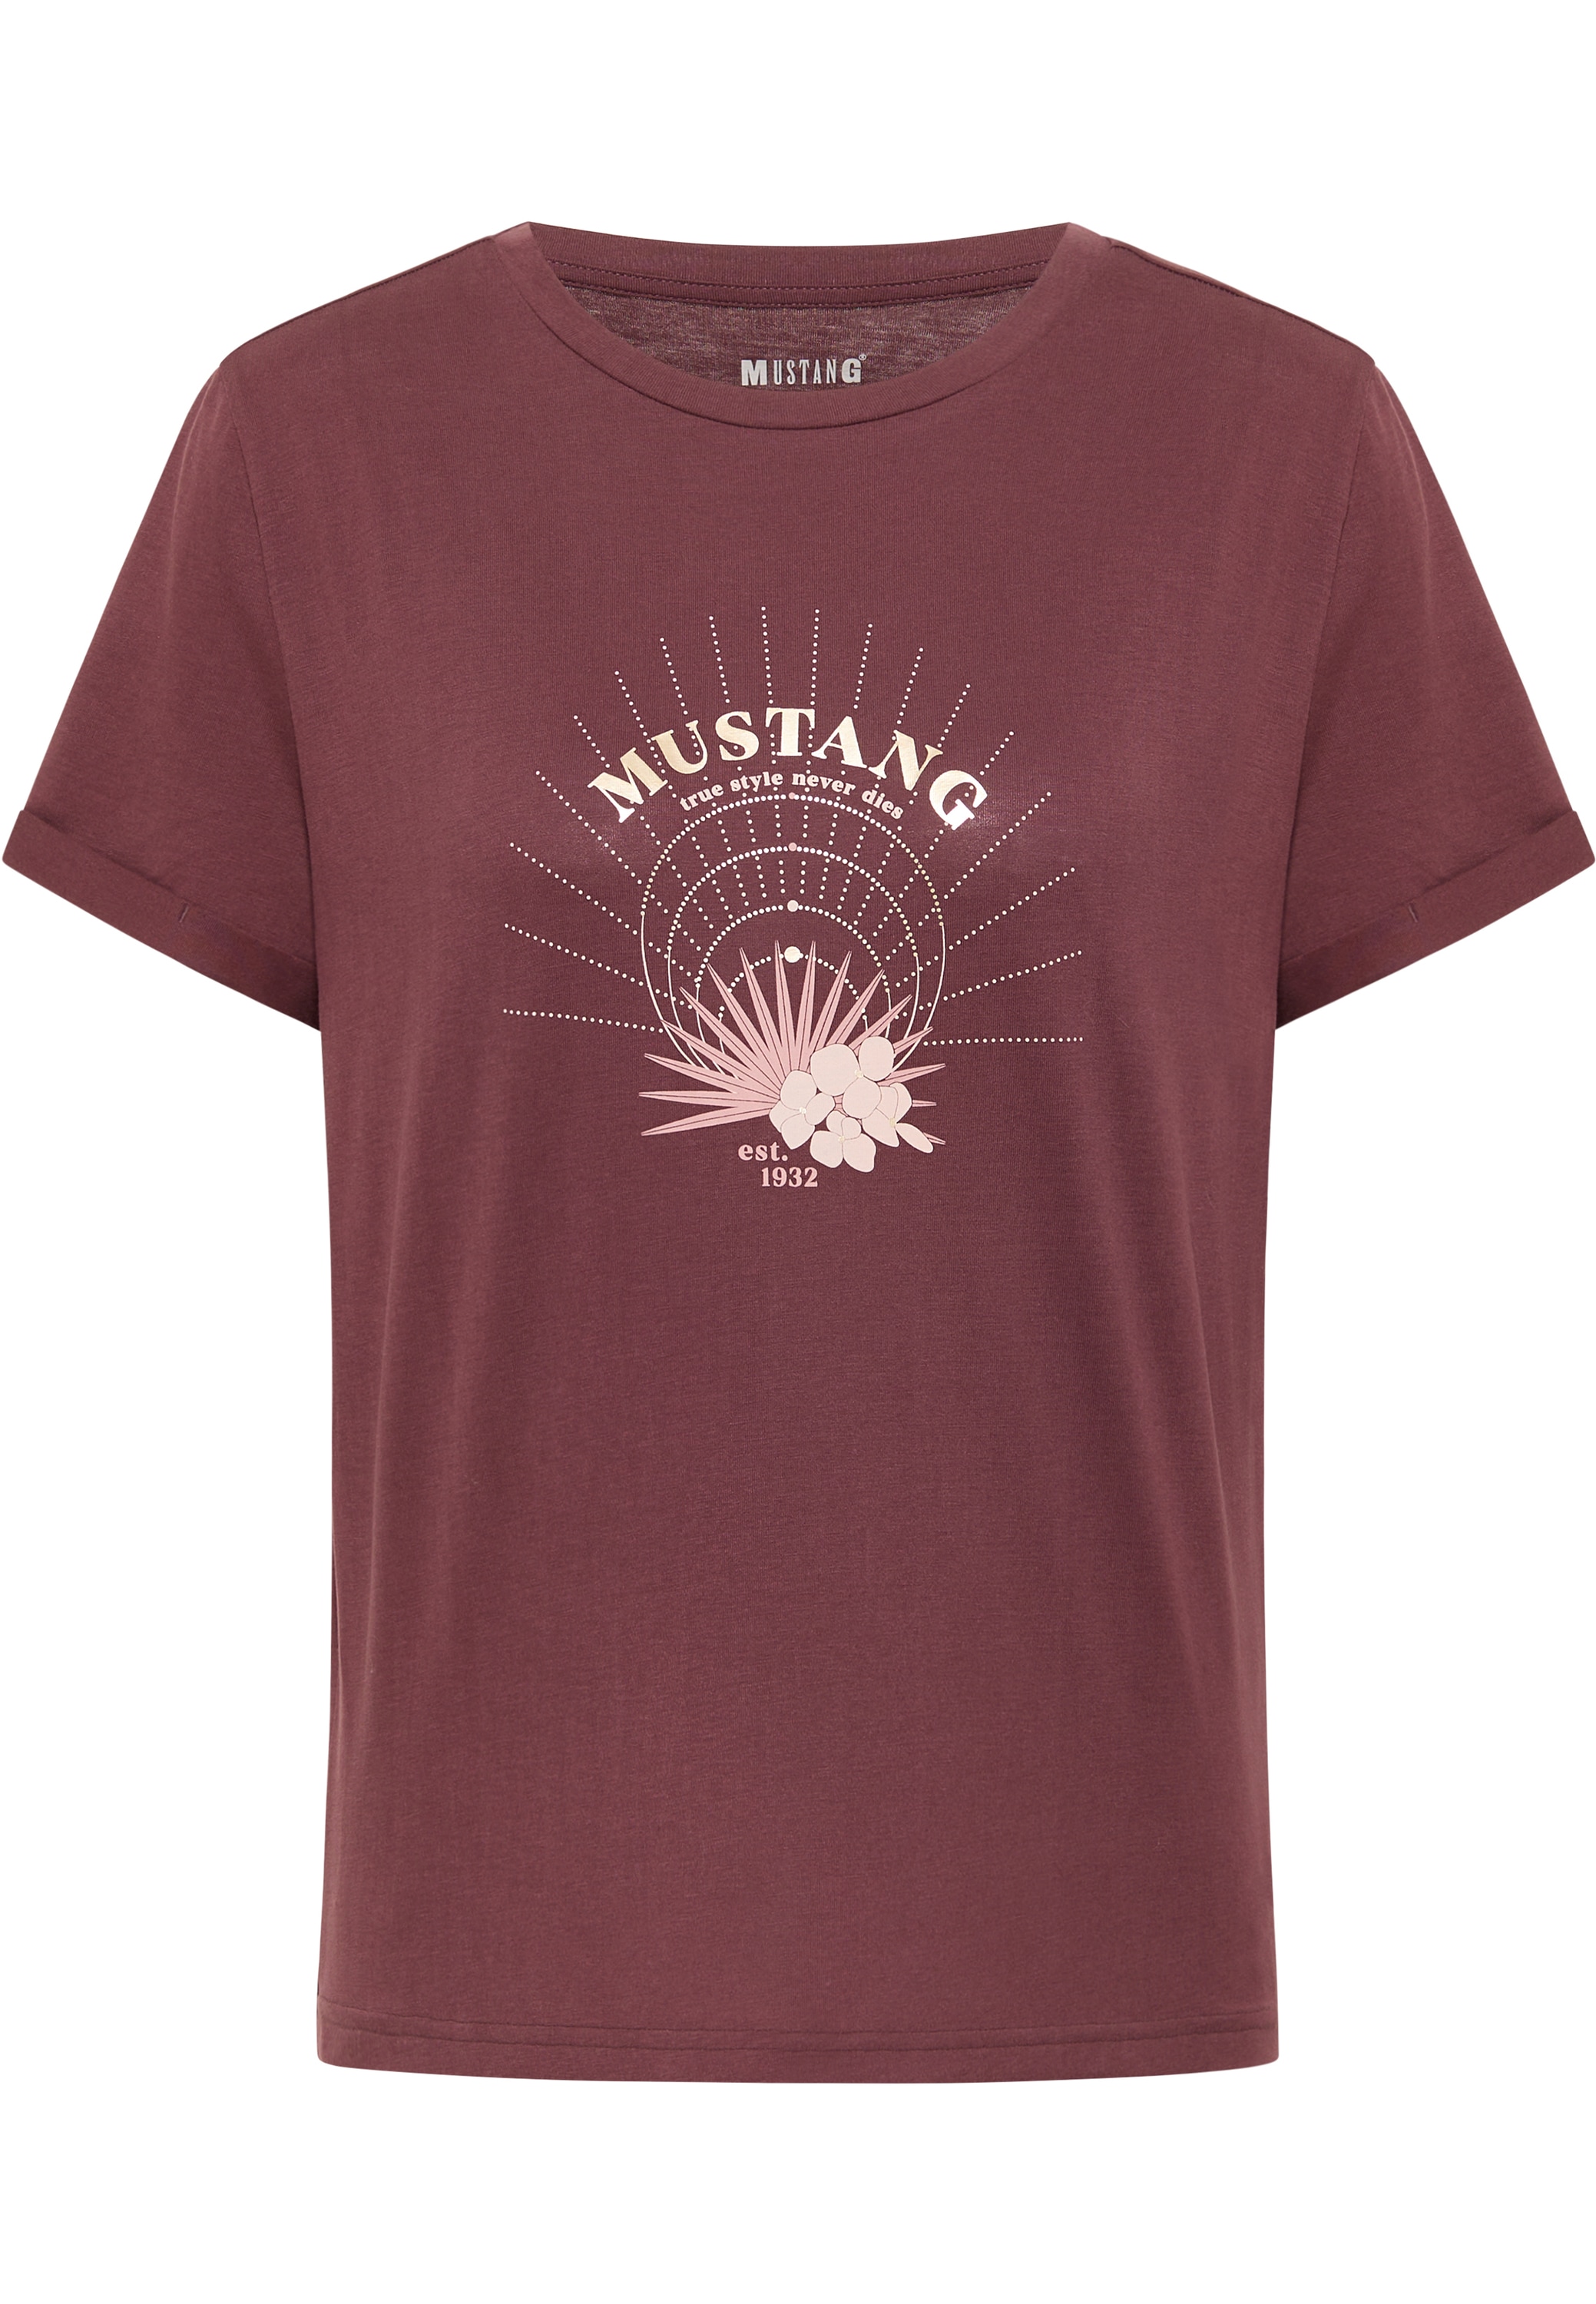 MUSTANG T-Shirt »Style Alina C OTTOversand Foil« bei